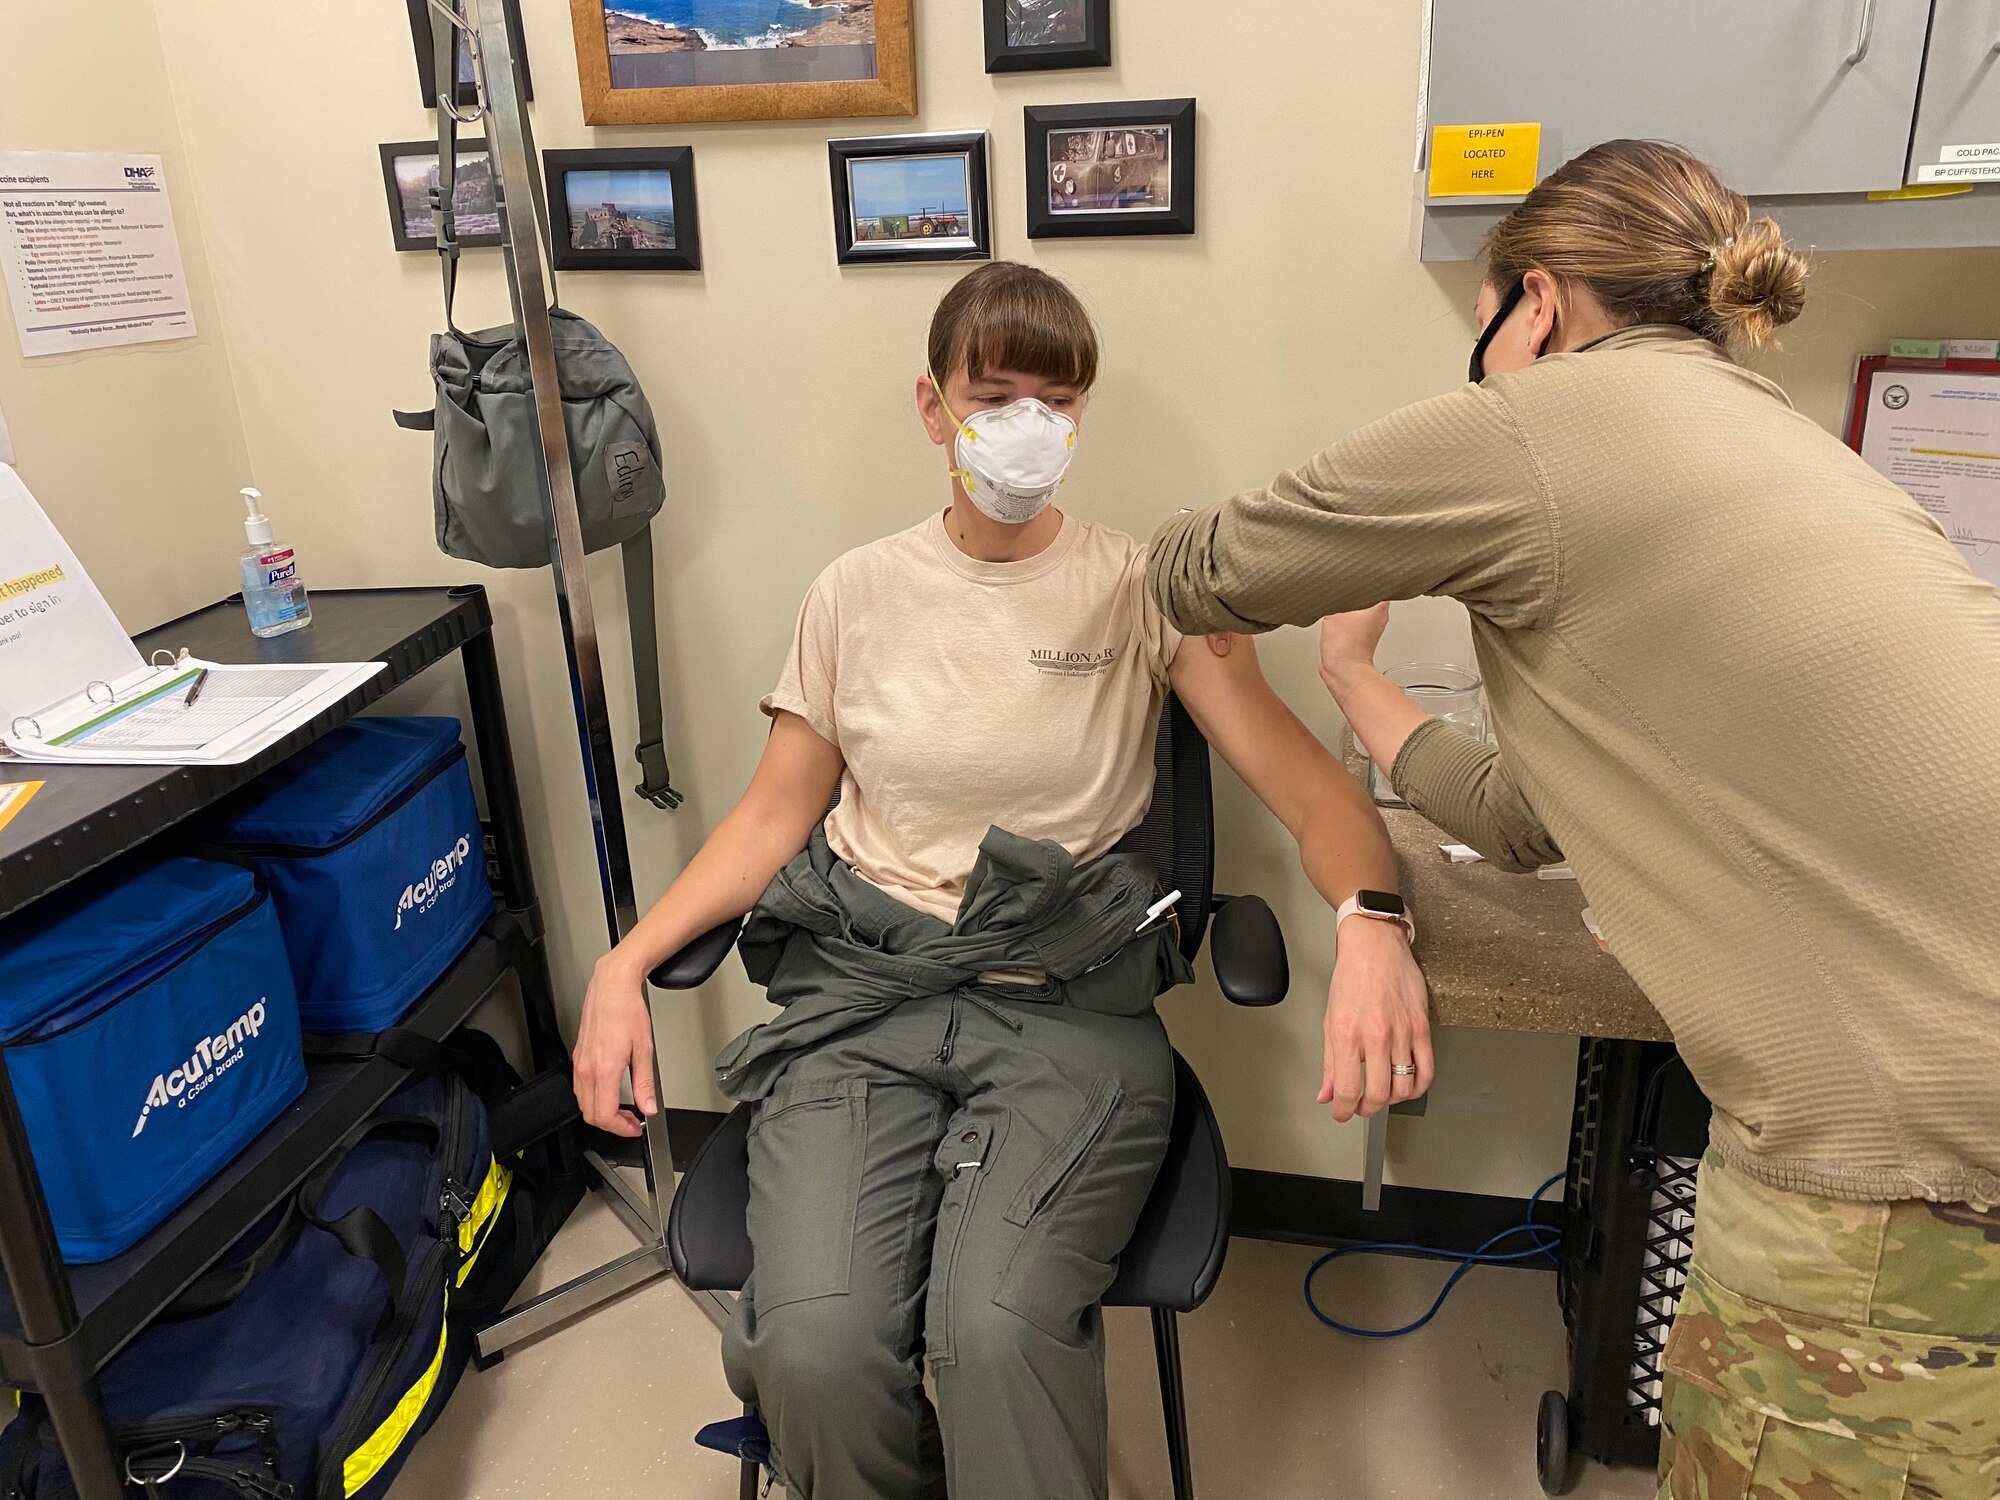 A member of the 128th Air Refueling Wing receives the COVID-19 Vaccine here at 128th Air Refueling Wing, Milwaukee, Feb. 7, 2020. The 128th Air Refueling Wing has begun the distribution of the COVID-19 vaccine in coordination with the U.S. Department of Defense's Operation Warp Speed. (U.S. Air National Guard photo by Master Sgt. Kellen Kroening)